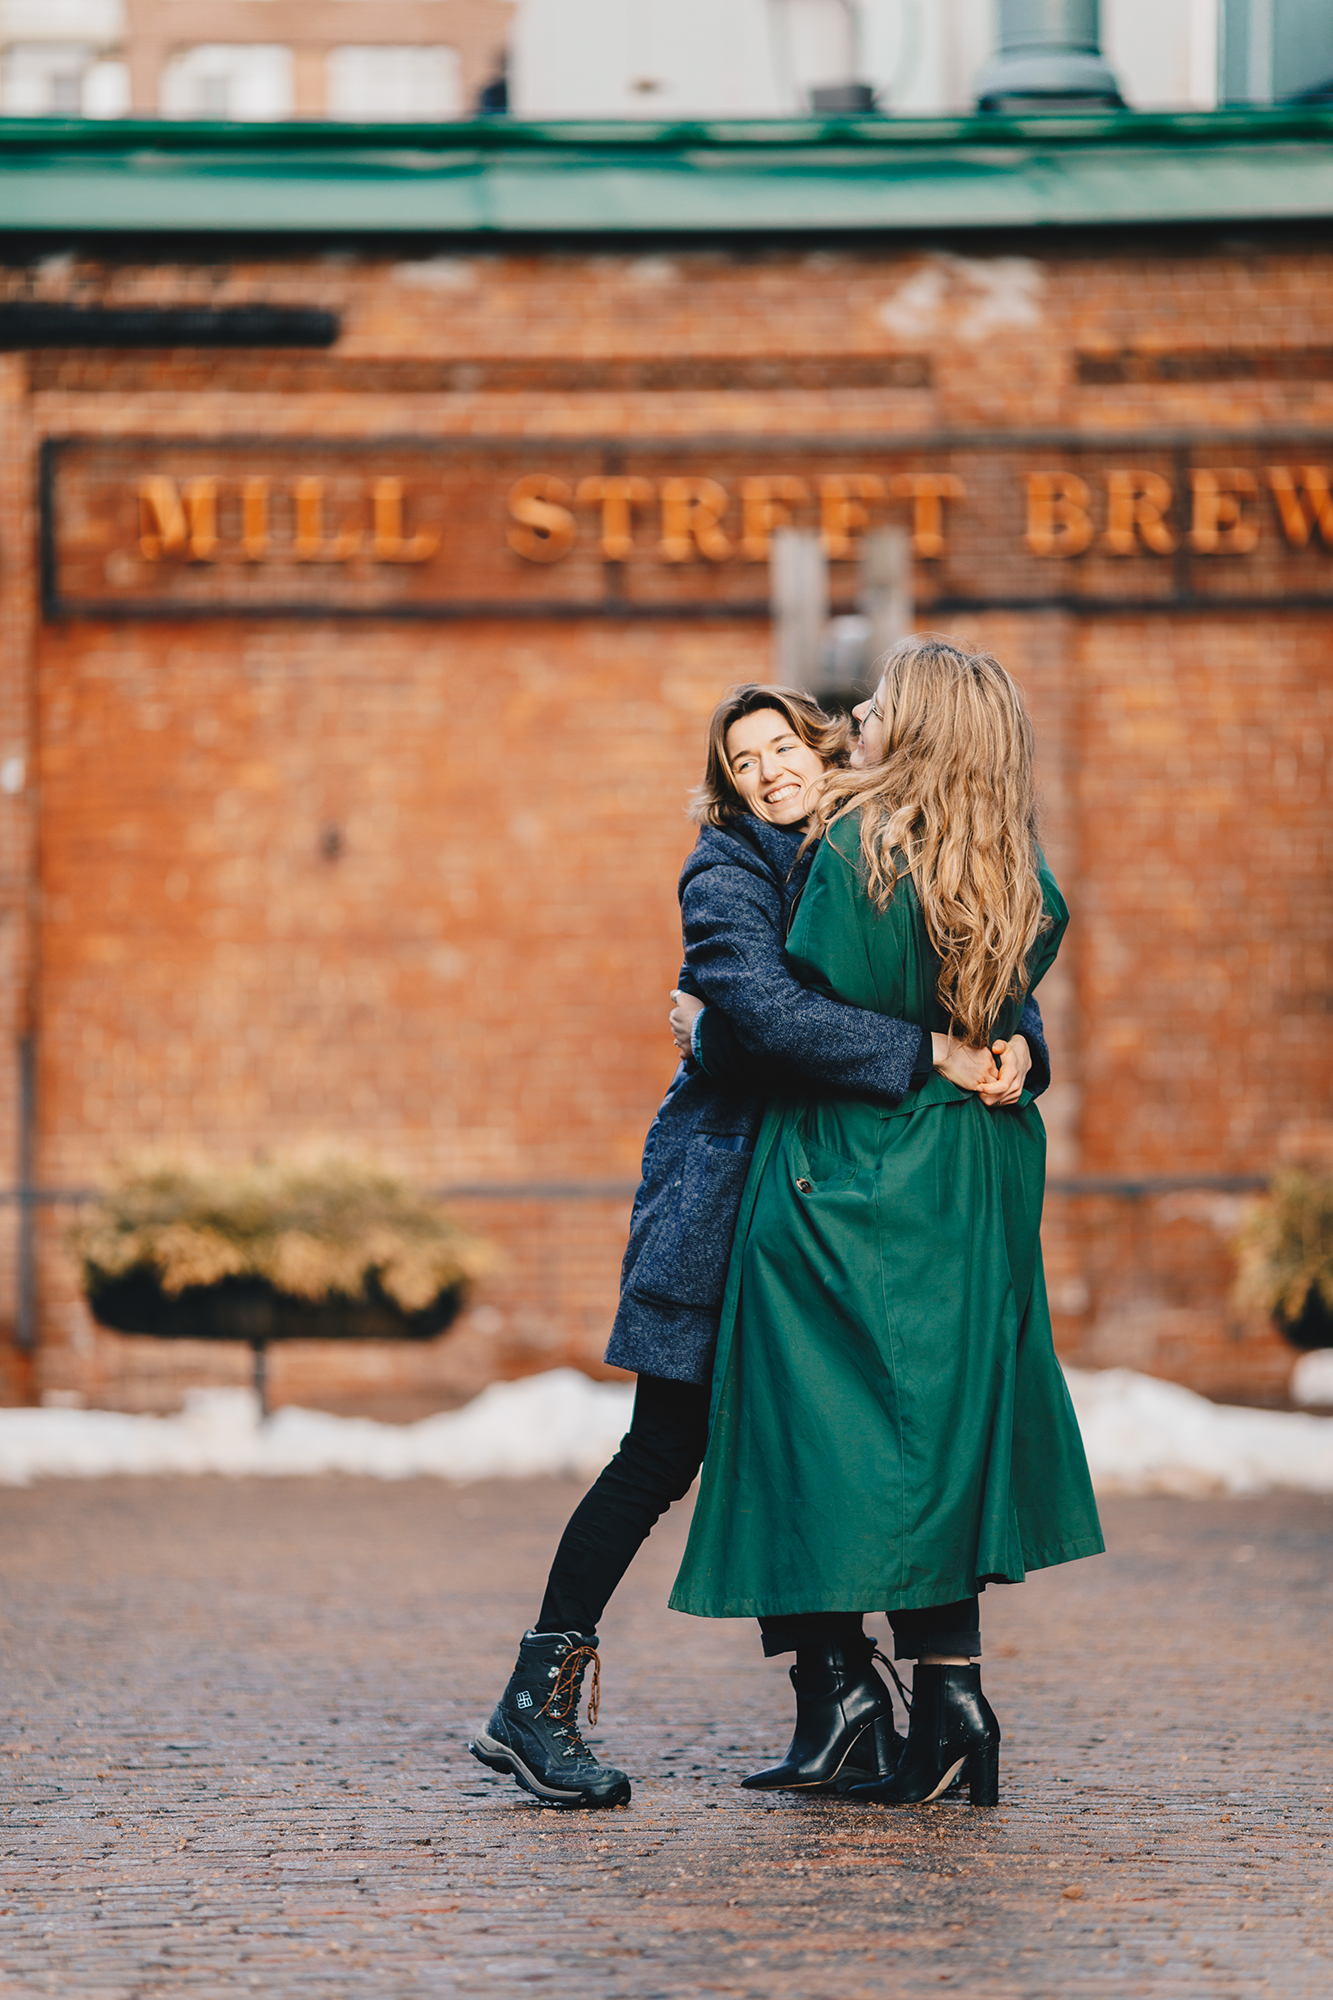 Amazing NYC Engagement photo locations and ideas